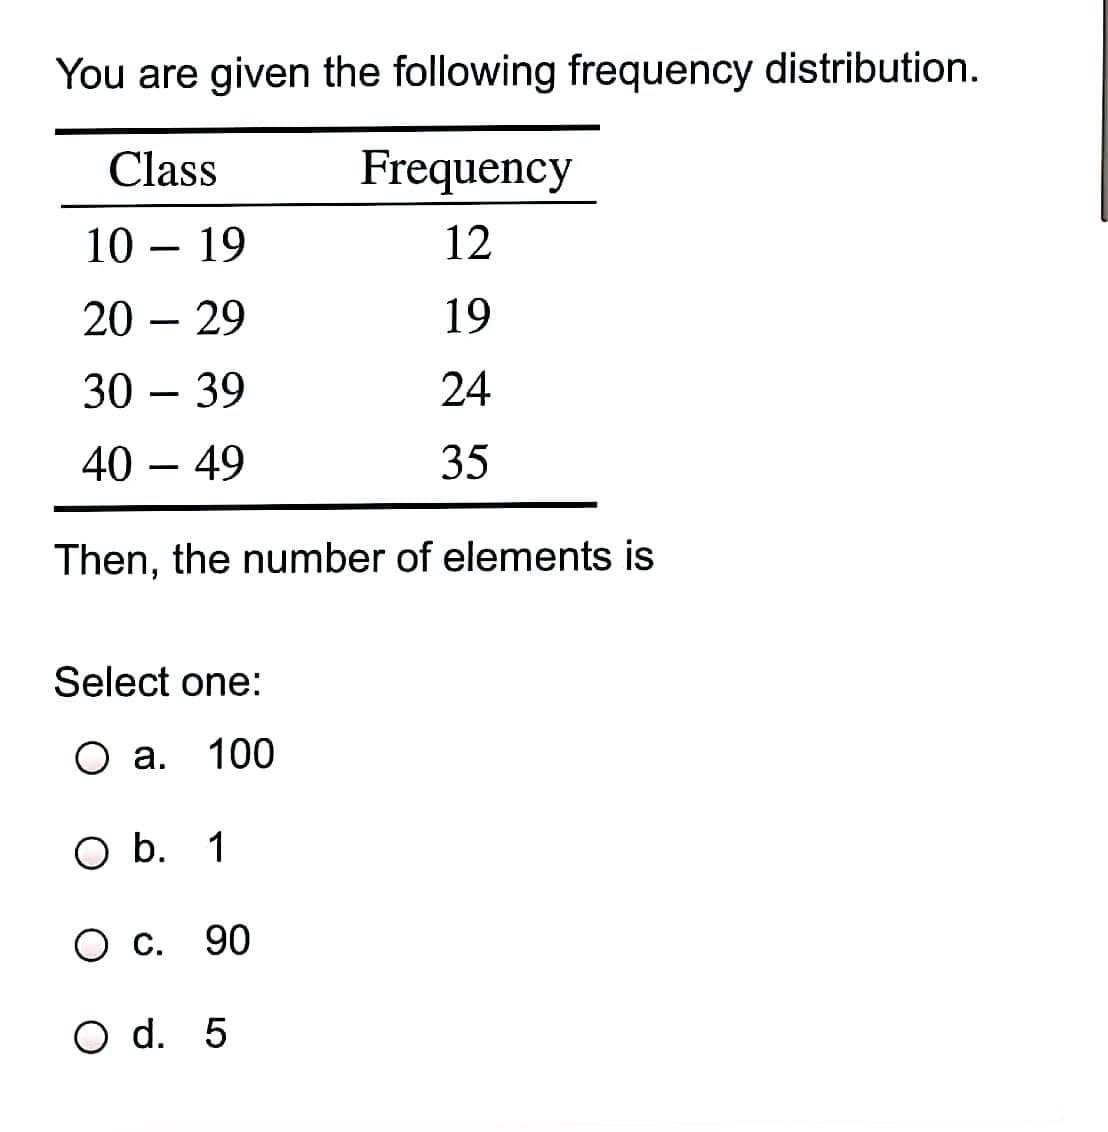 You are given the following frequency distribution.
Class
Frequency
10 – 19
12
20 – 29
19
30 – 39
24
40 – 49
35
Then, the number of elements is
Select one:
О а. 100
O b. 1
Ос. 90
O d. 5
